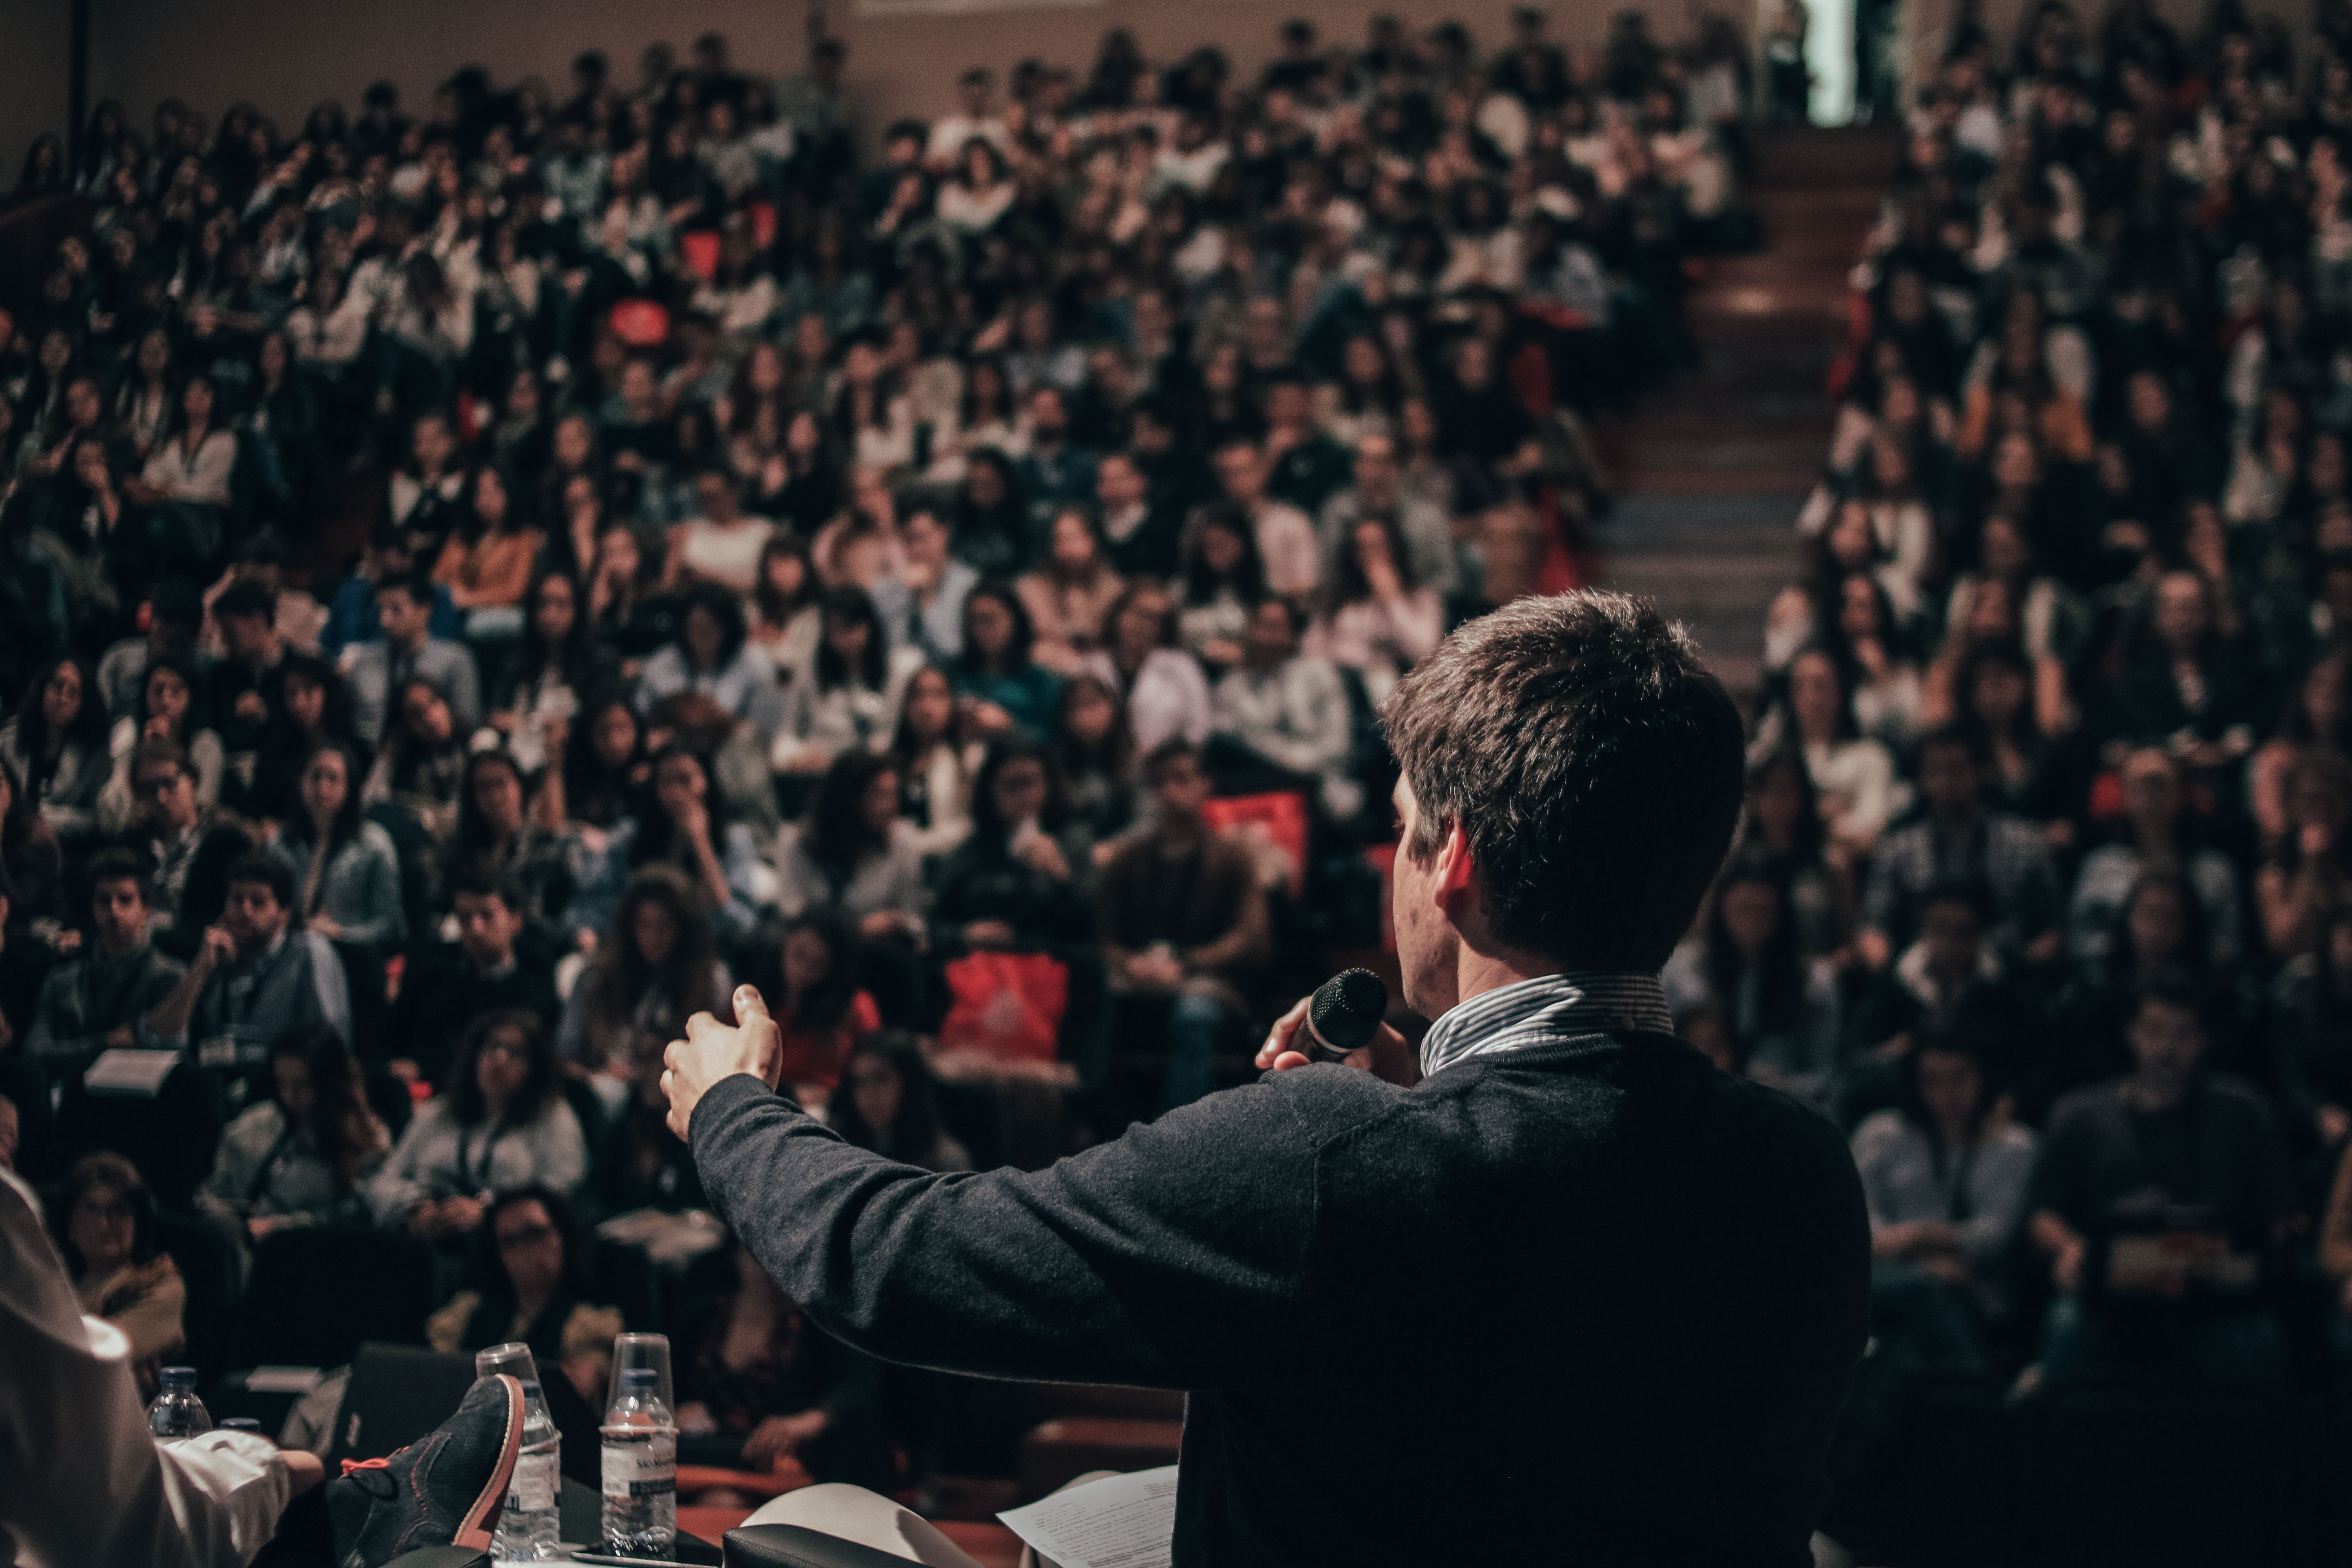 Man speaking in front of an audience. | Source: Unsplash